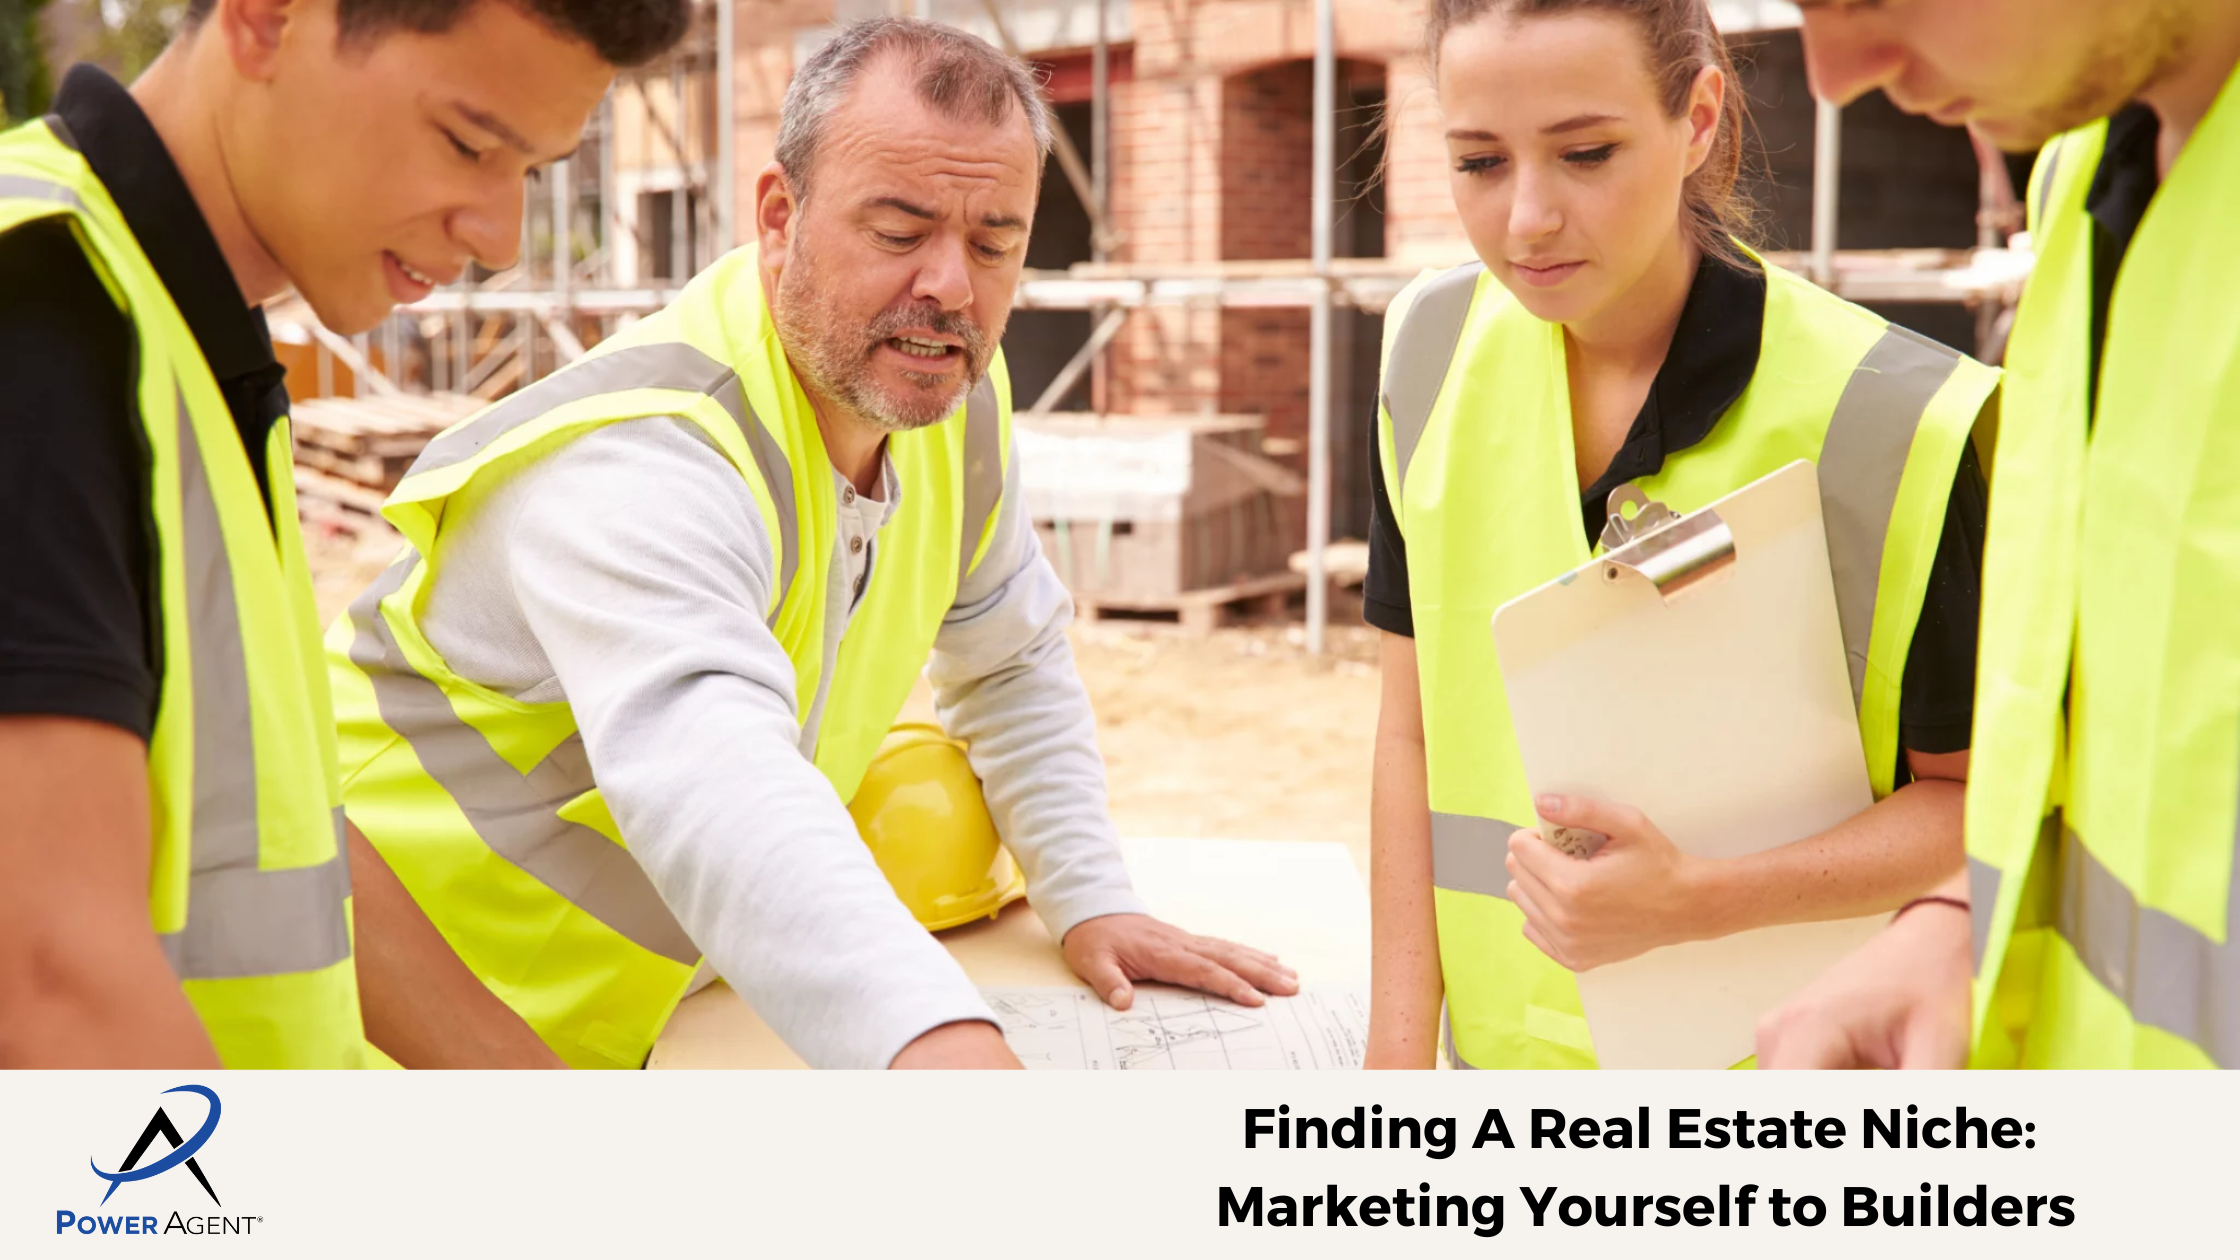 Finding A Real Estate Niche: Marketing Yourself to Builders